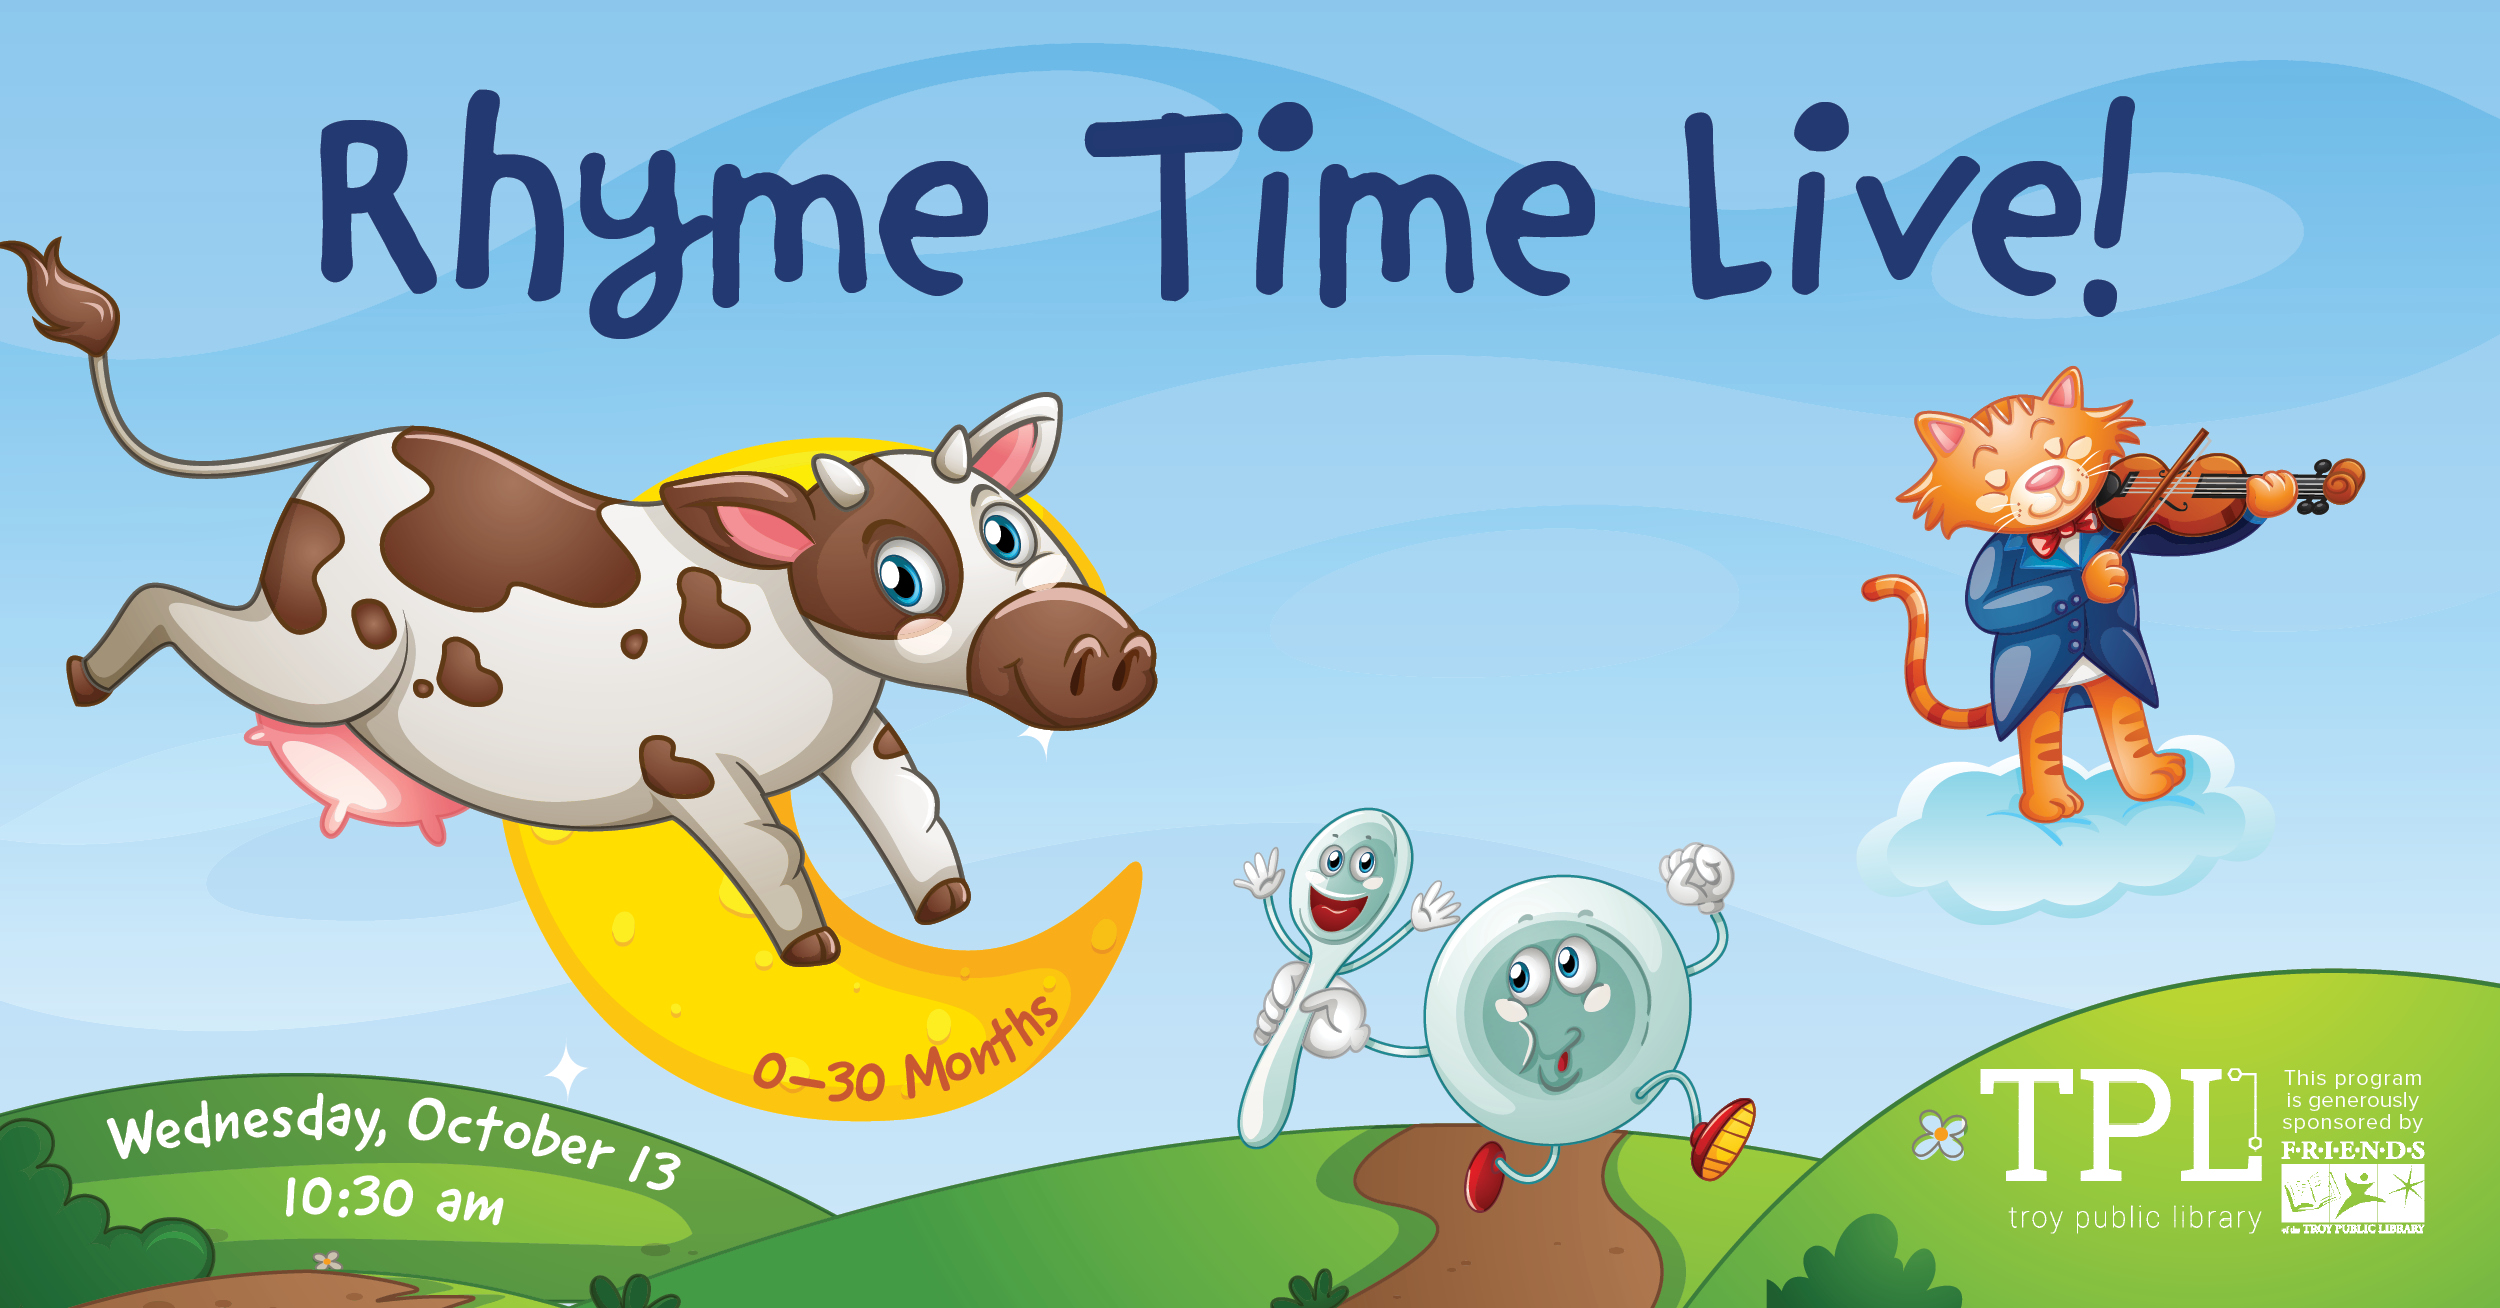 Rhyme time Live Wednesday, October 13 at 10:30am. 0 to 30 months. Sponsored by the Friends of the Troy Public Library